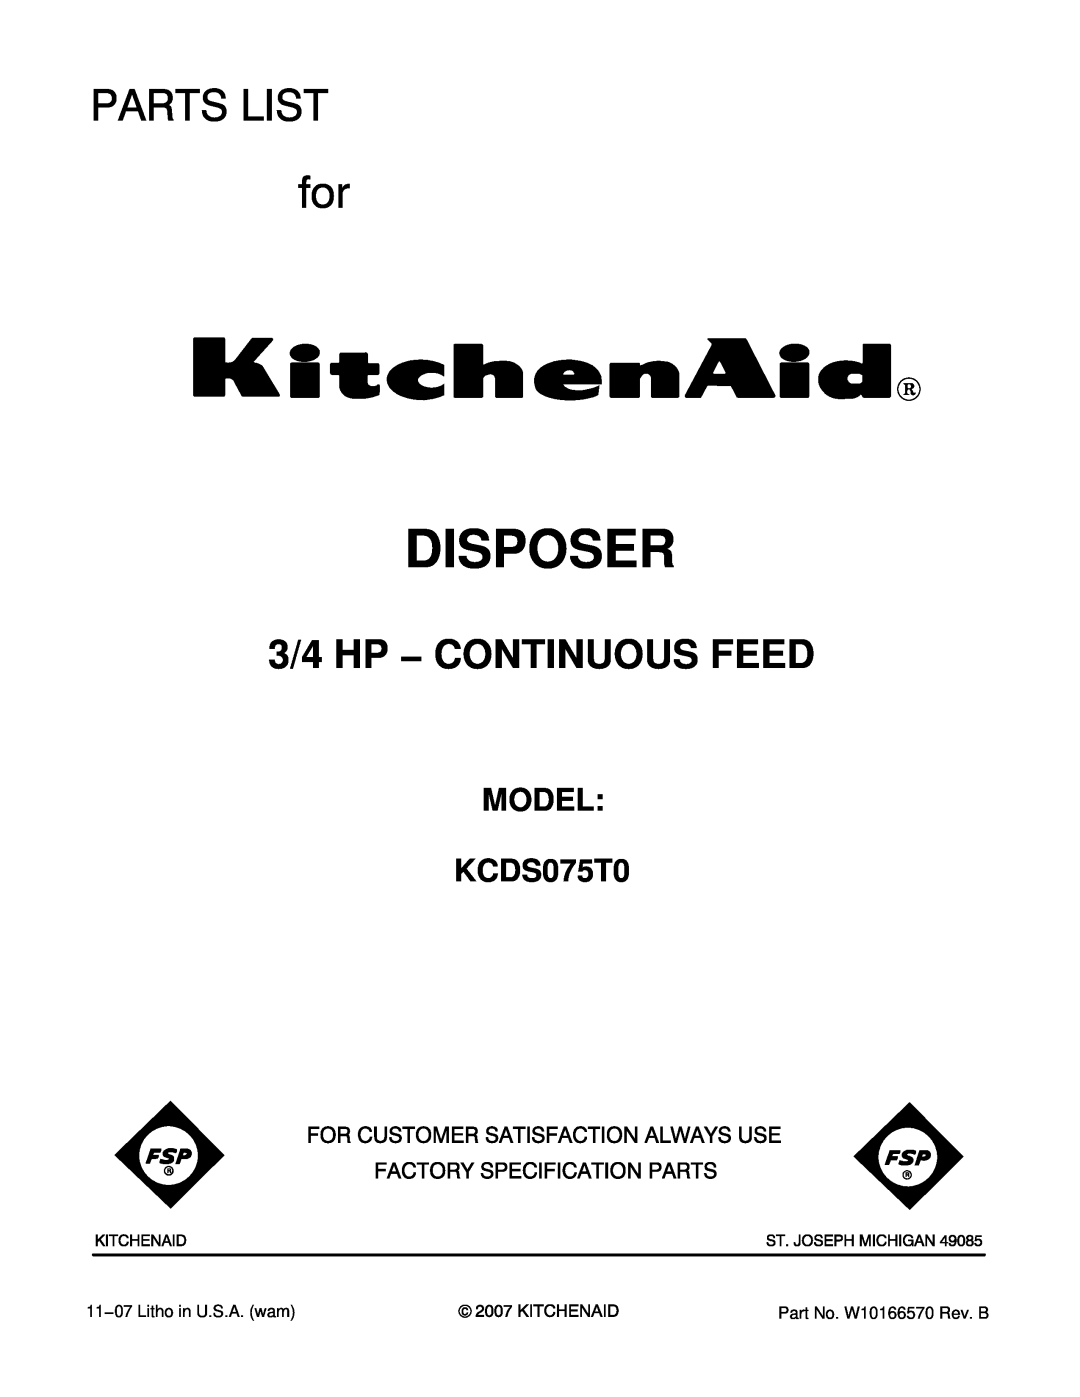 KitchenAid manual Disposer, 3/4 HP − CONTINUOUS FEED, MODEL KCDS075T0 